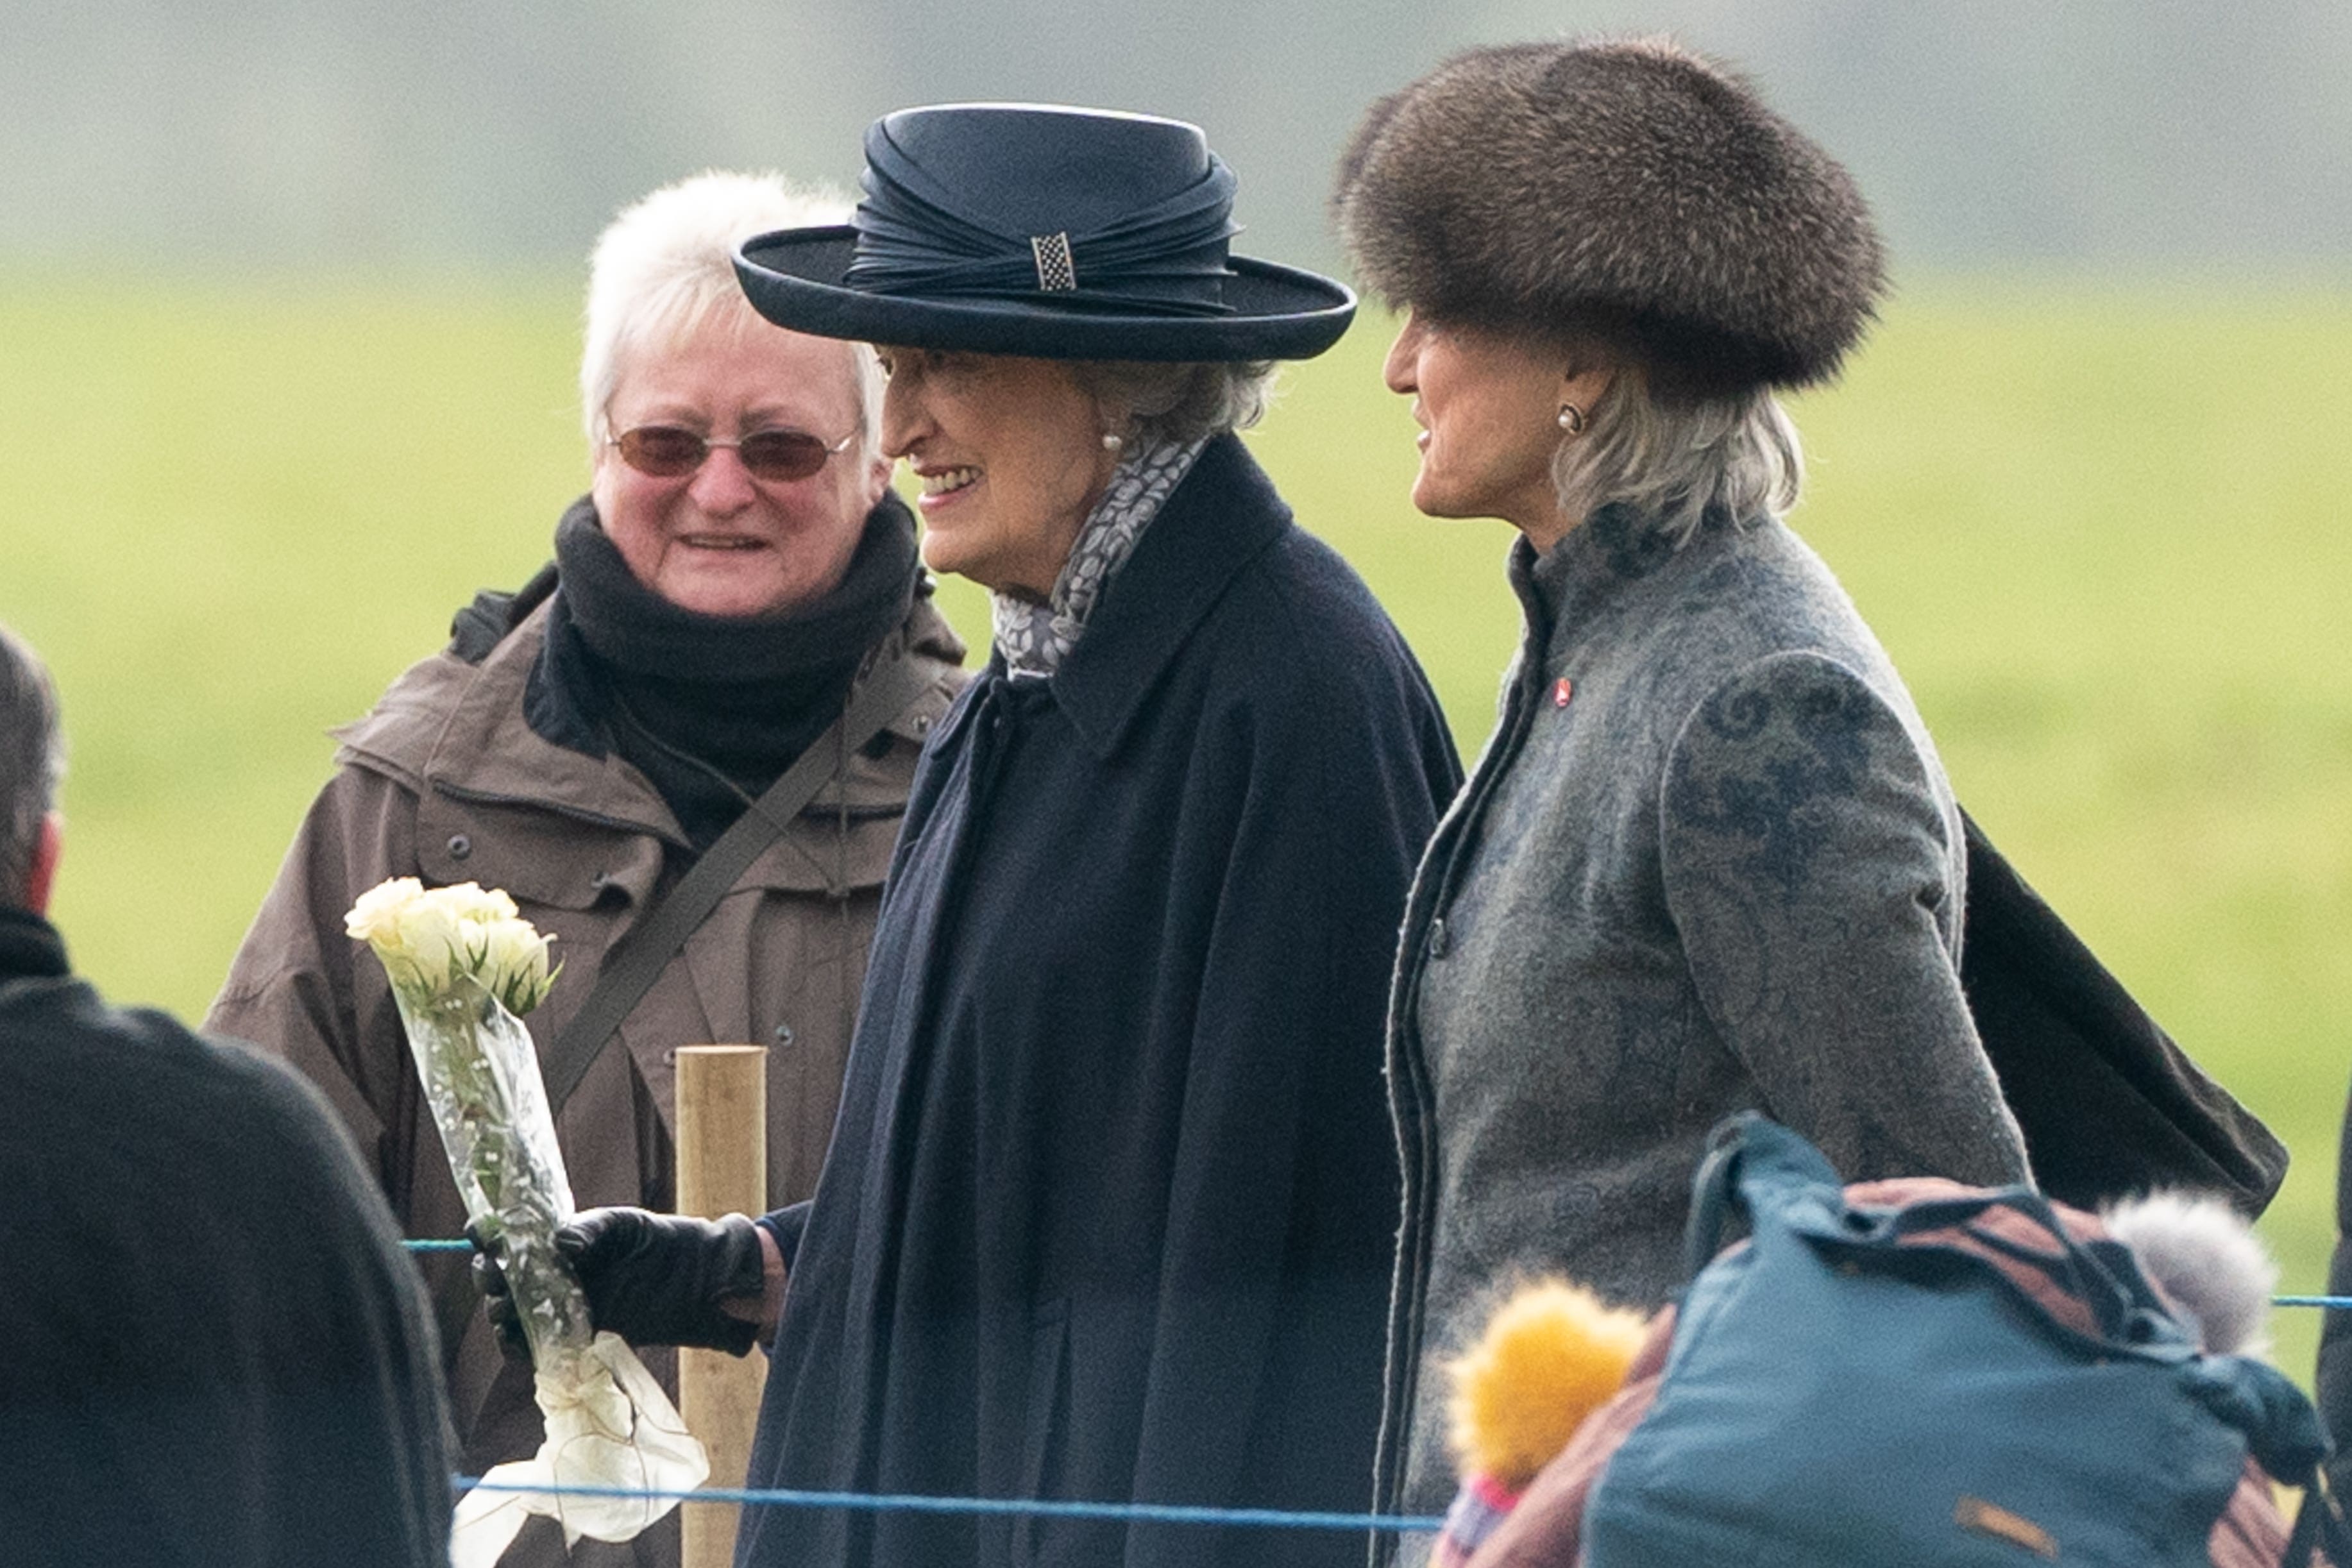 Lady Susan Hussey joined the King and the Princess Royal at a church service at Sandringham, two months after resigning in a racism row (Joe Giddens/PA)